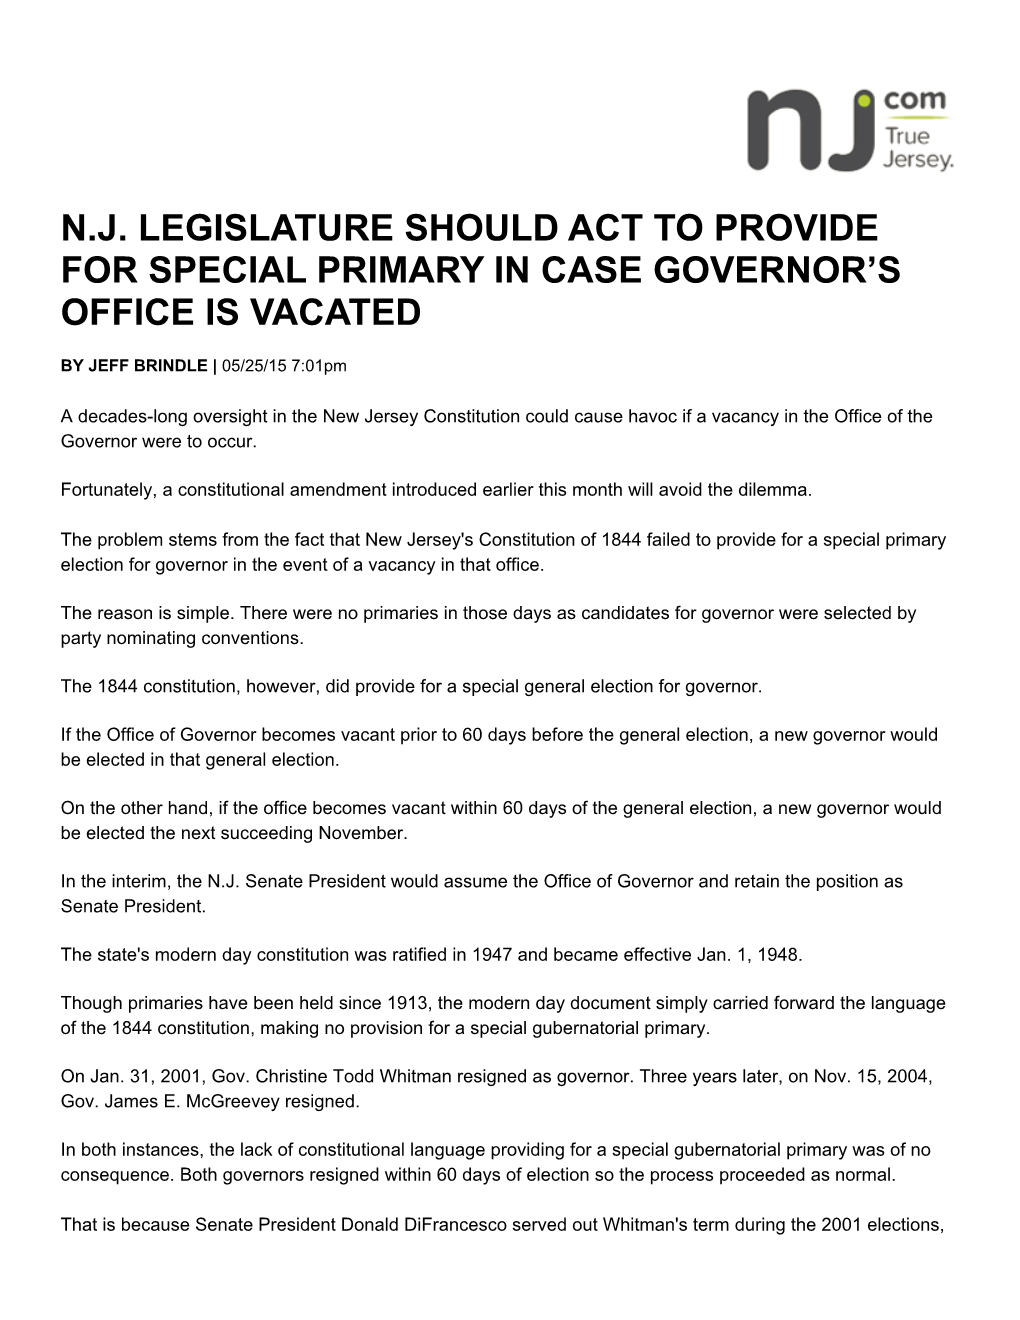 N.J. Legislature Should Act to Provide for Special Primary in Case Governor’S Office Is Vacated